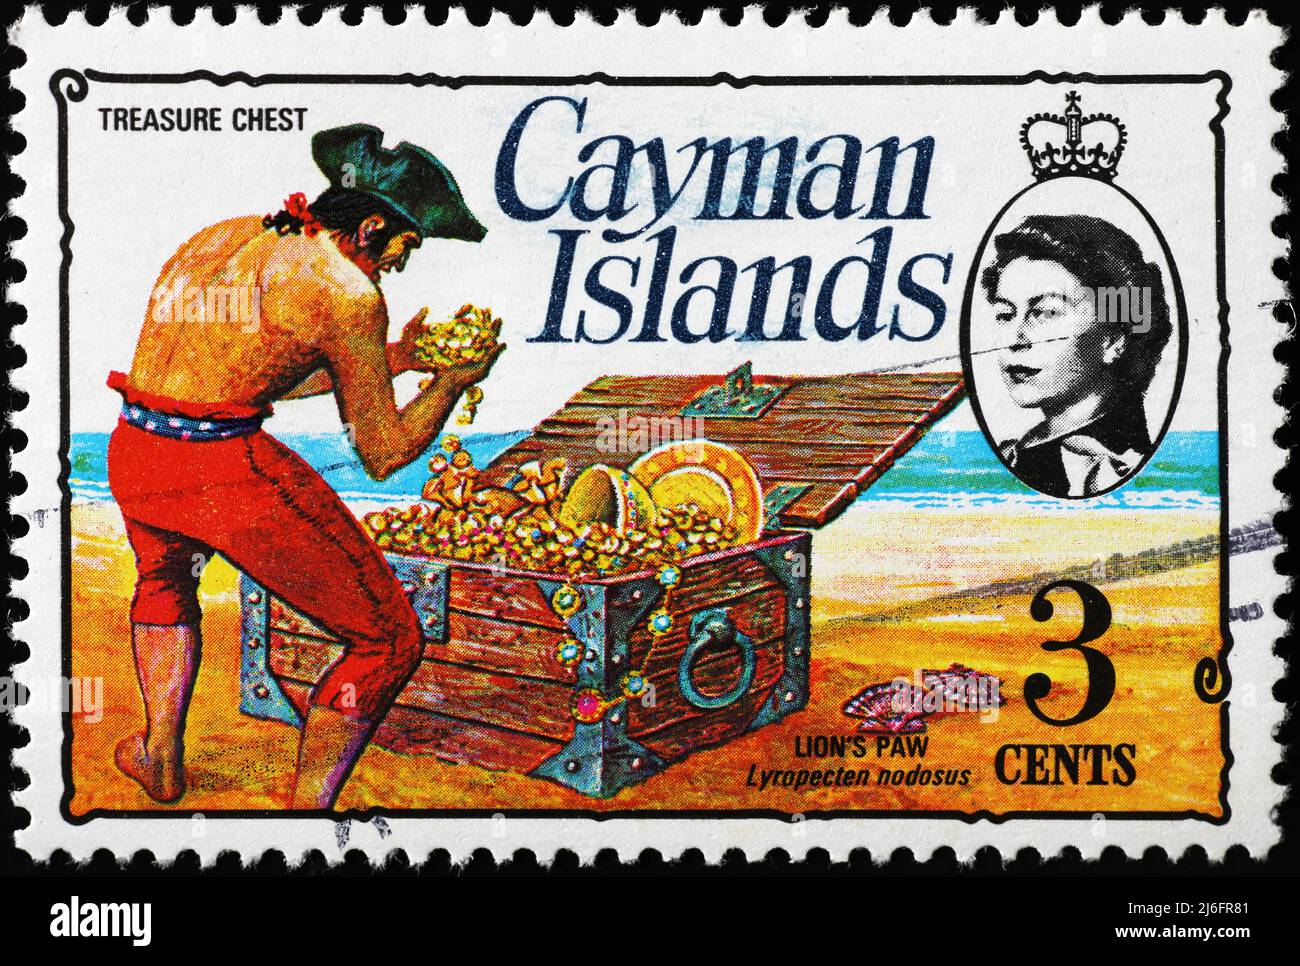 Treasure chest and pirate on stamp of Cayman islands Stock Photo